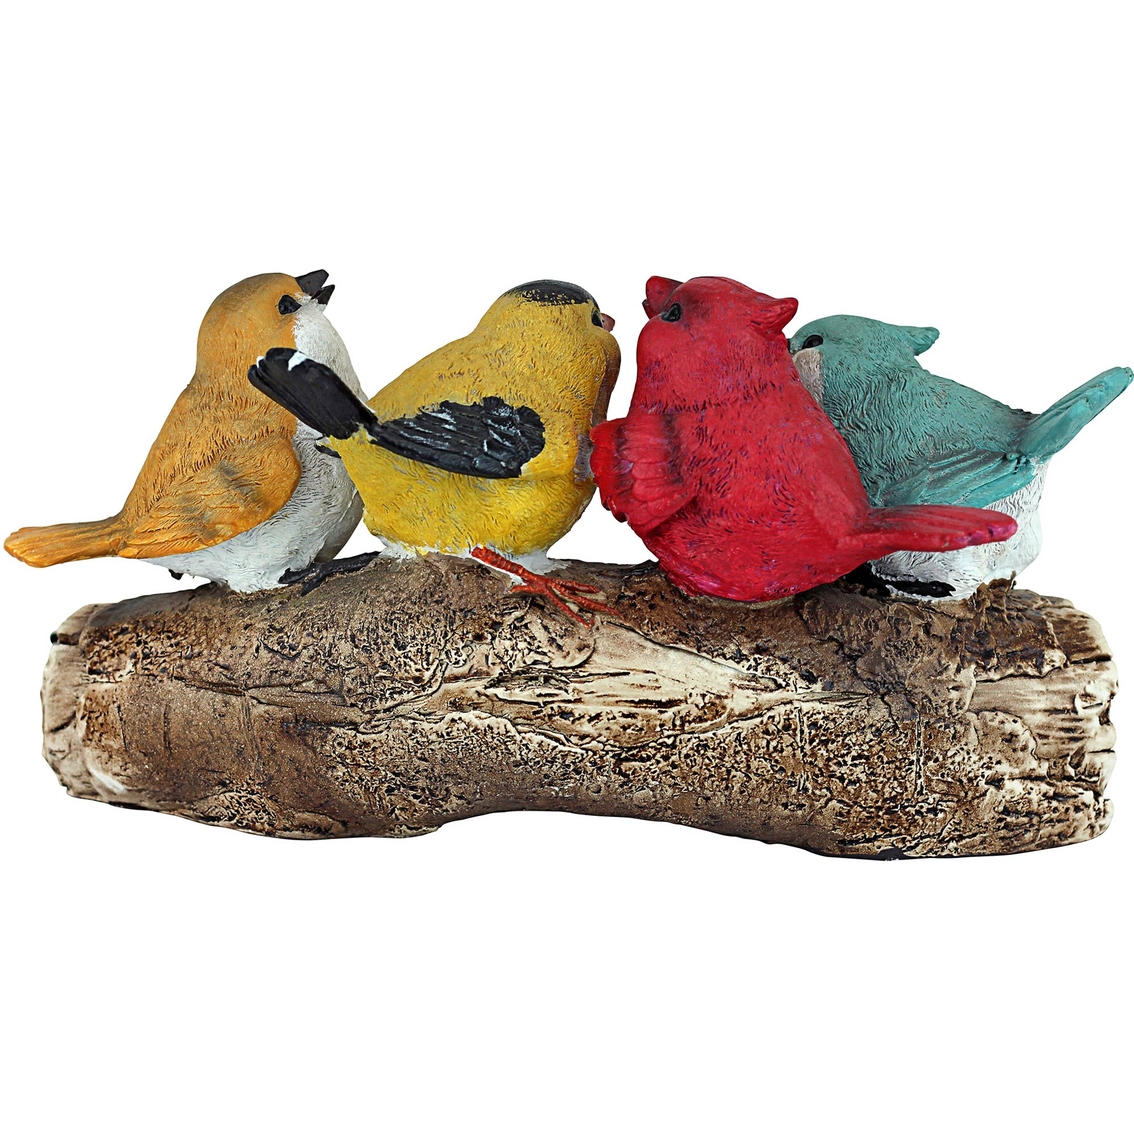 Design Toscano Birdy Welcome Statue - Image 3 of 4